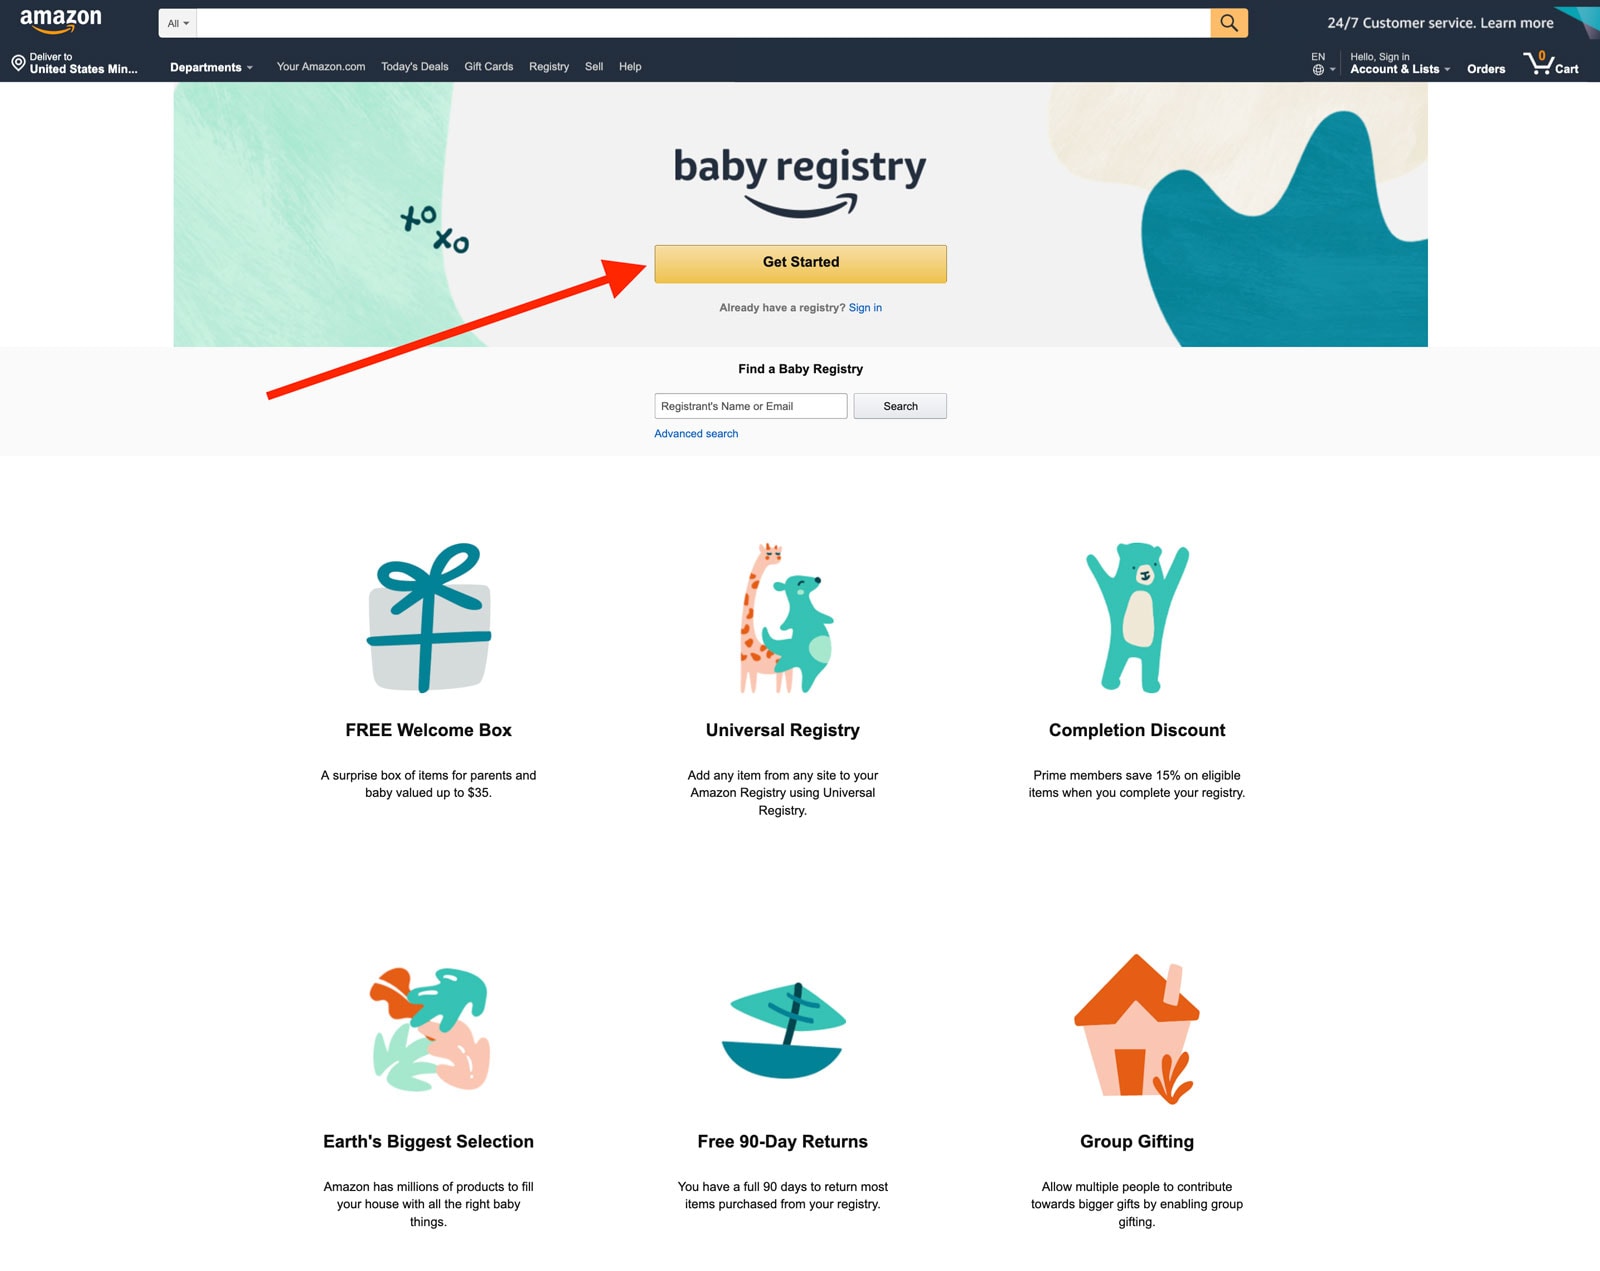 How to create a Gift Registry on Amazon - TechStory